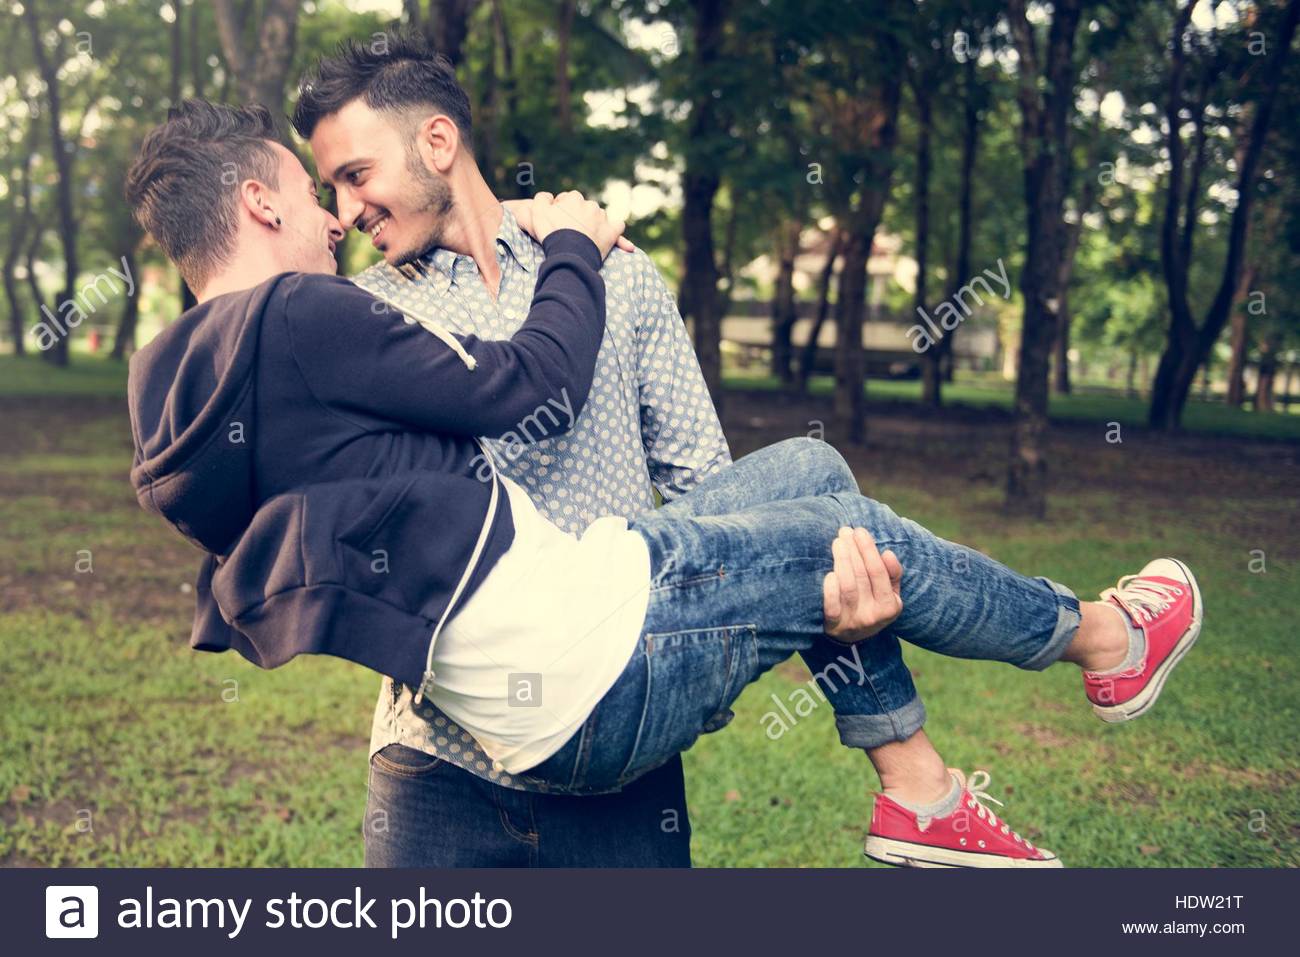 gay-couple-love-outdoors-concept-HDW21T.jpg